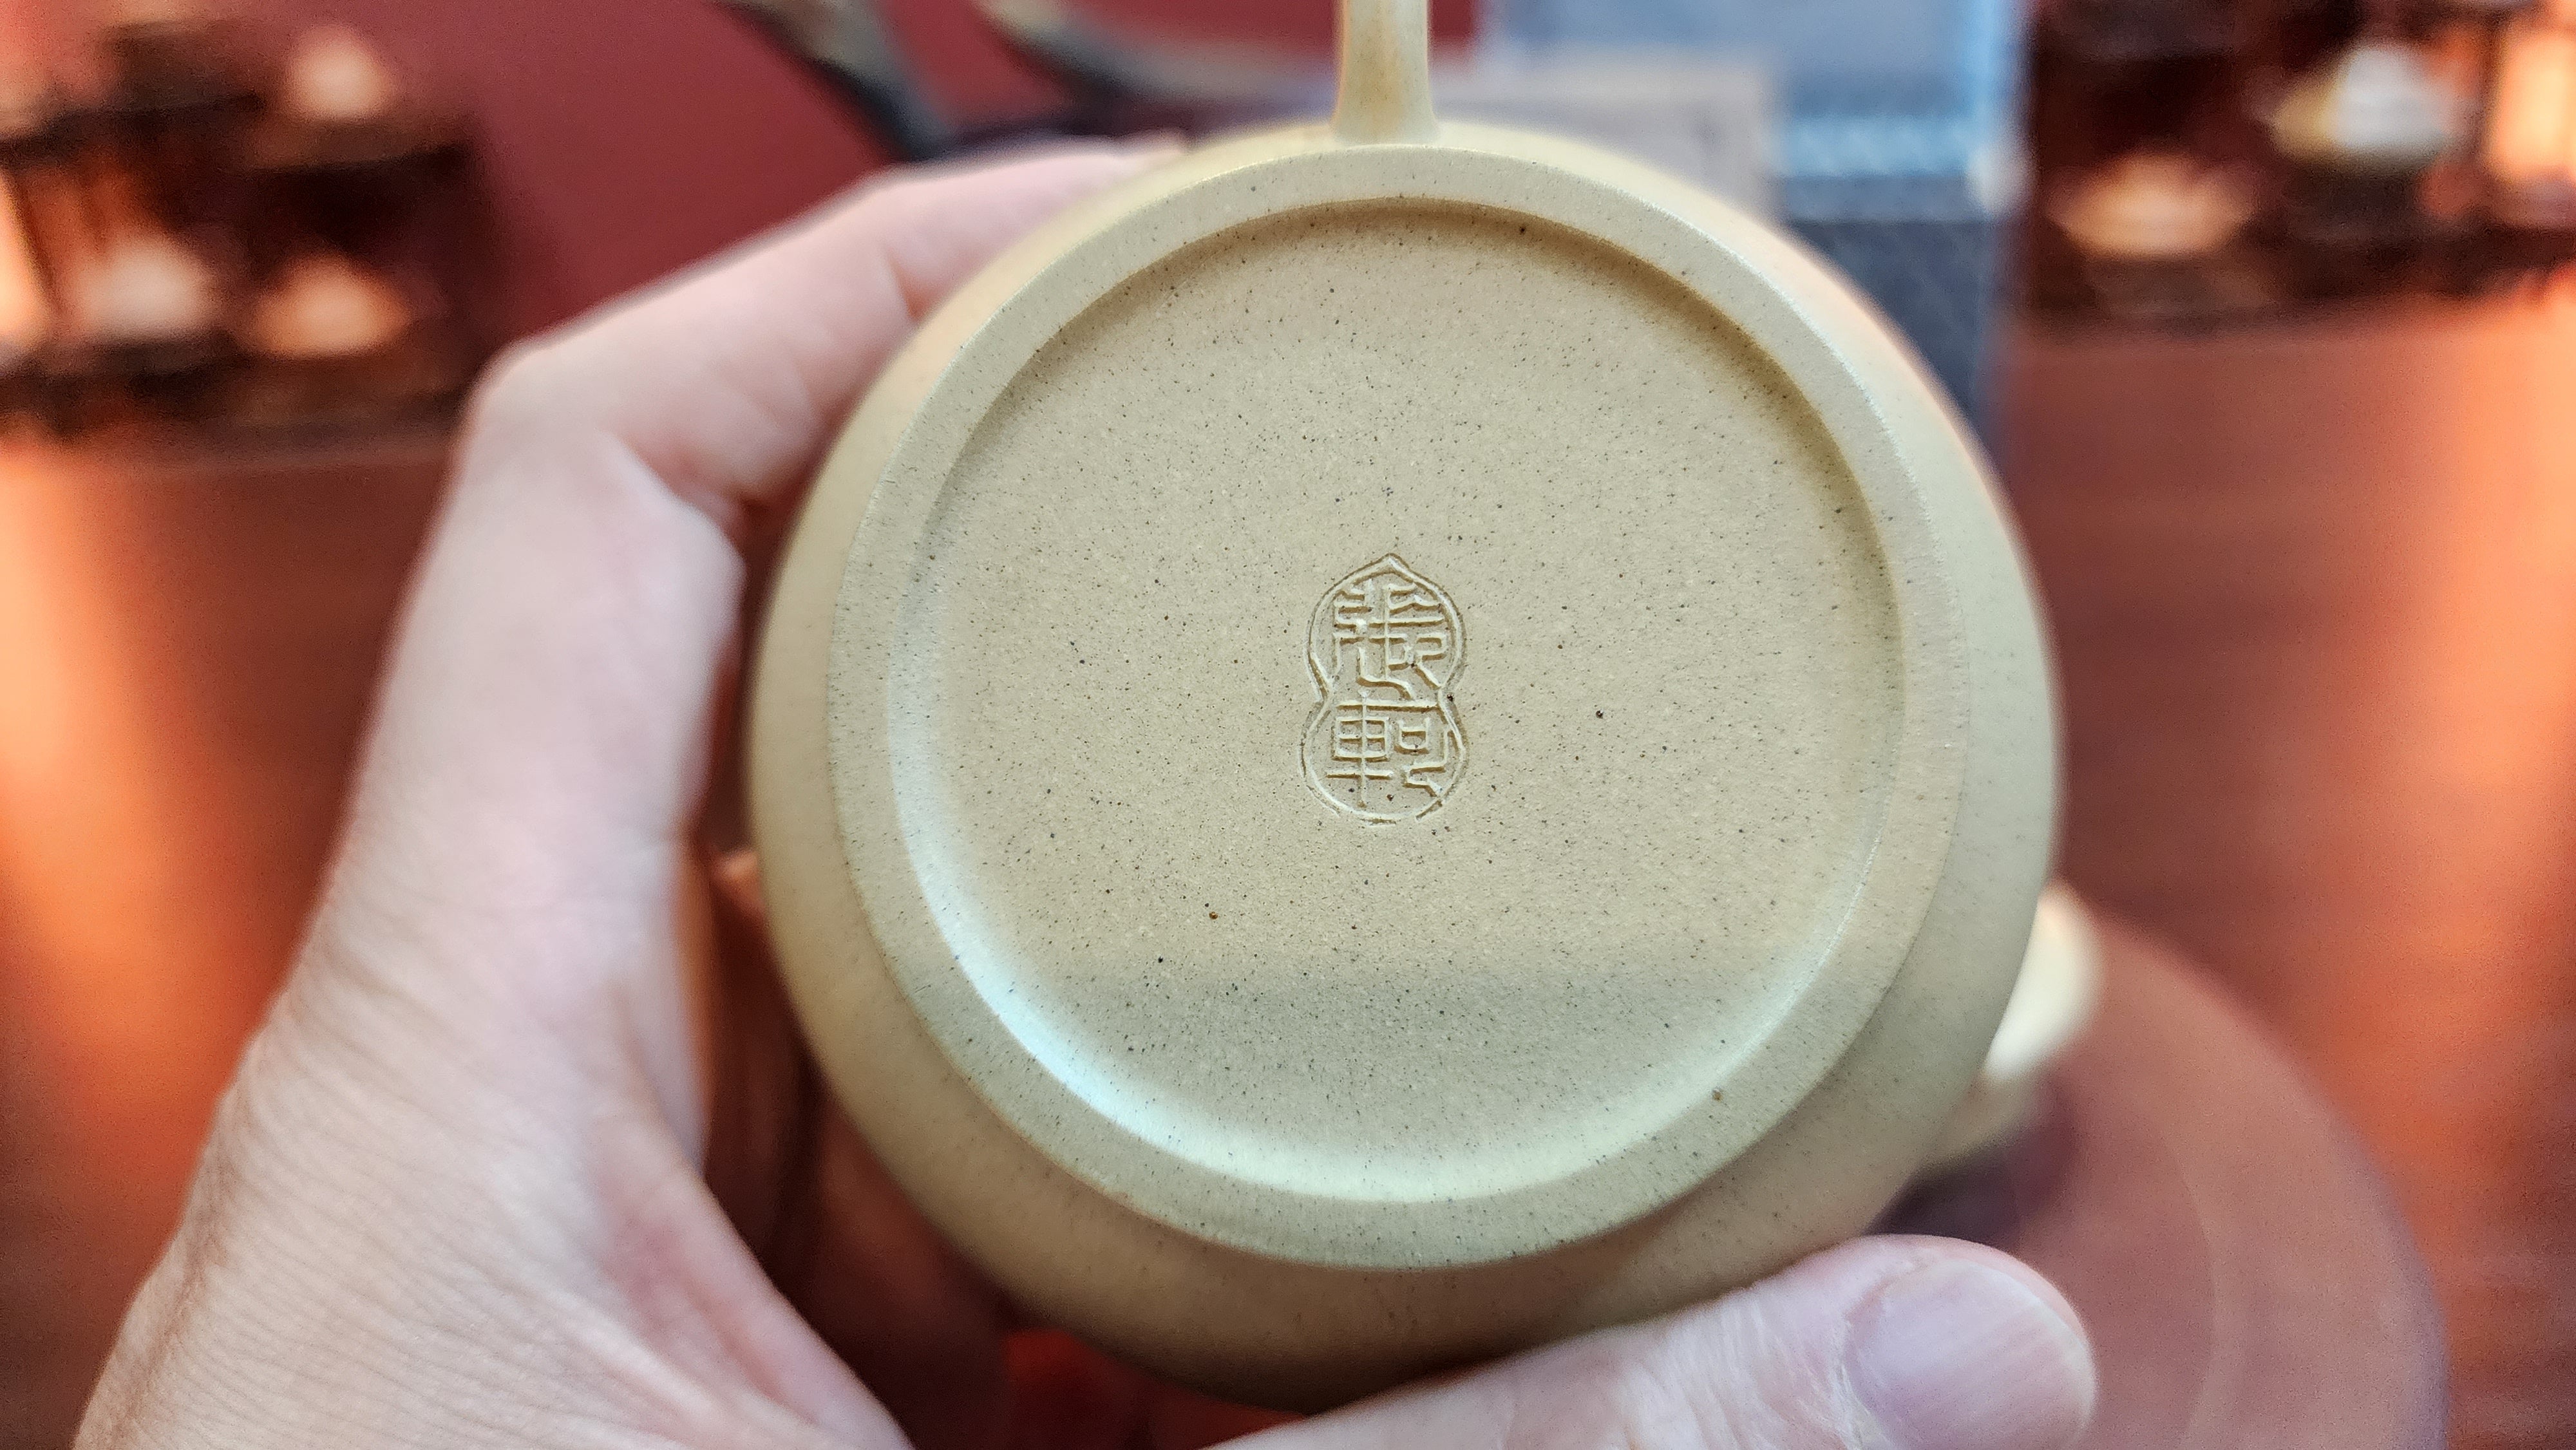 Shui Ping : Special : Exquisite *Thin-Walled*, 100% BenShan LüNi, SHUI PING Pot, 薄胎, 本山绿泥, 水平壶  made by L4 Assoc Master Artist Zhang Ke 助理工艺美术师, 张轲。- commissioned in Feb 2023 for our Italian Tea Master and Professor at University of Milan.